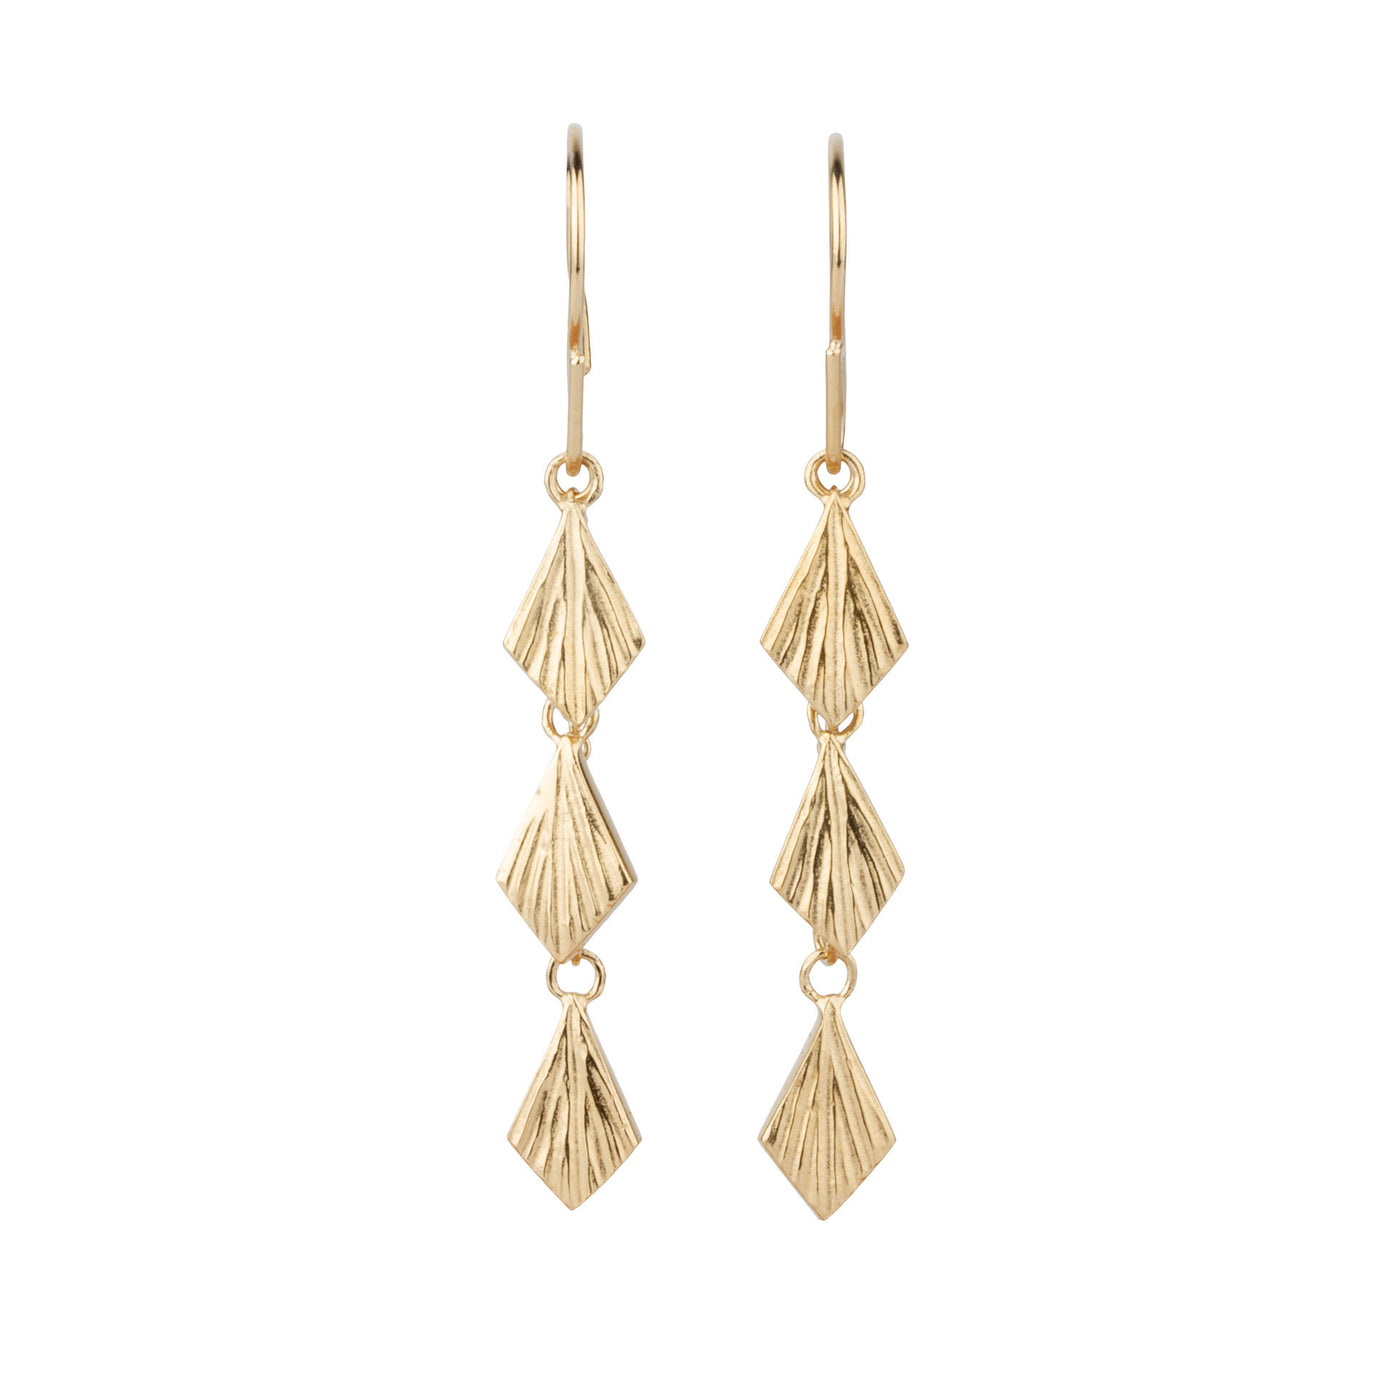 Three overlapping cascading tiers of fan-shaped flame dangles in gold vermeil hanging from an earwire